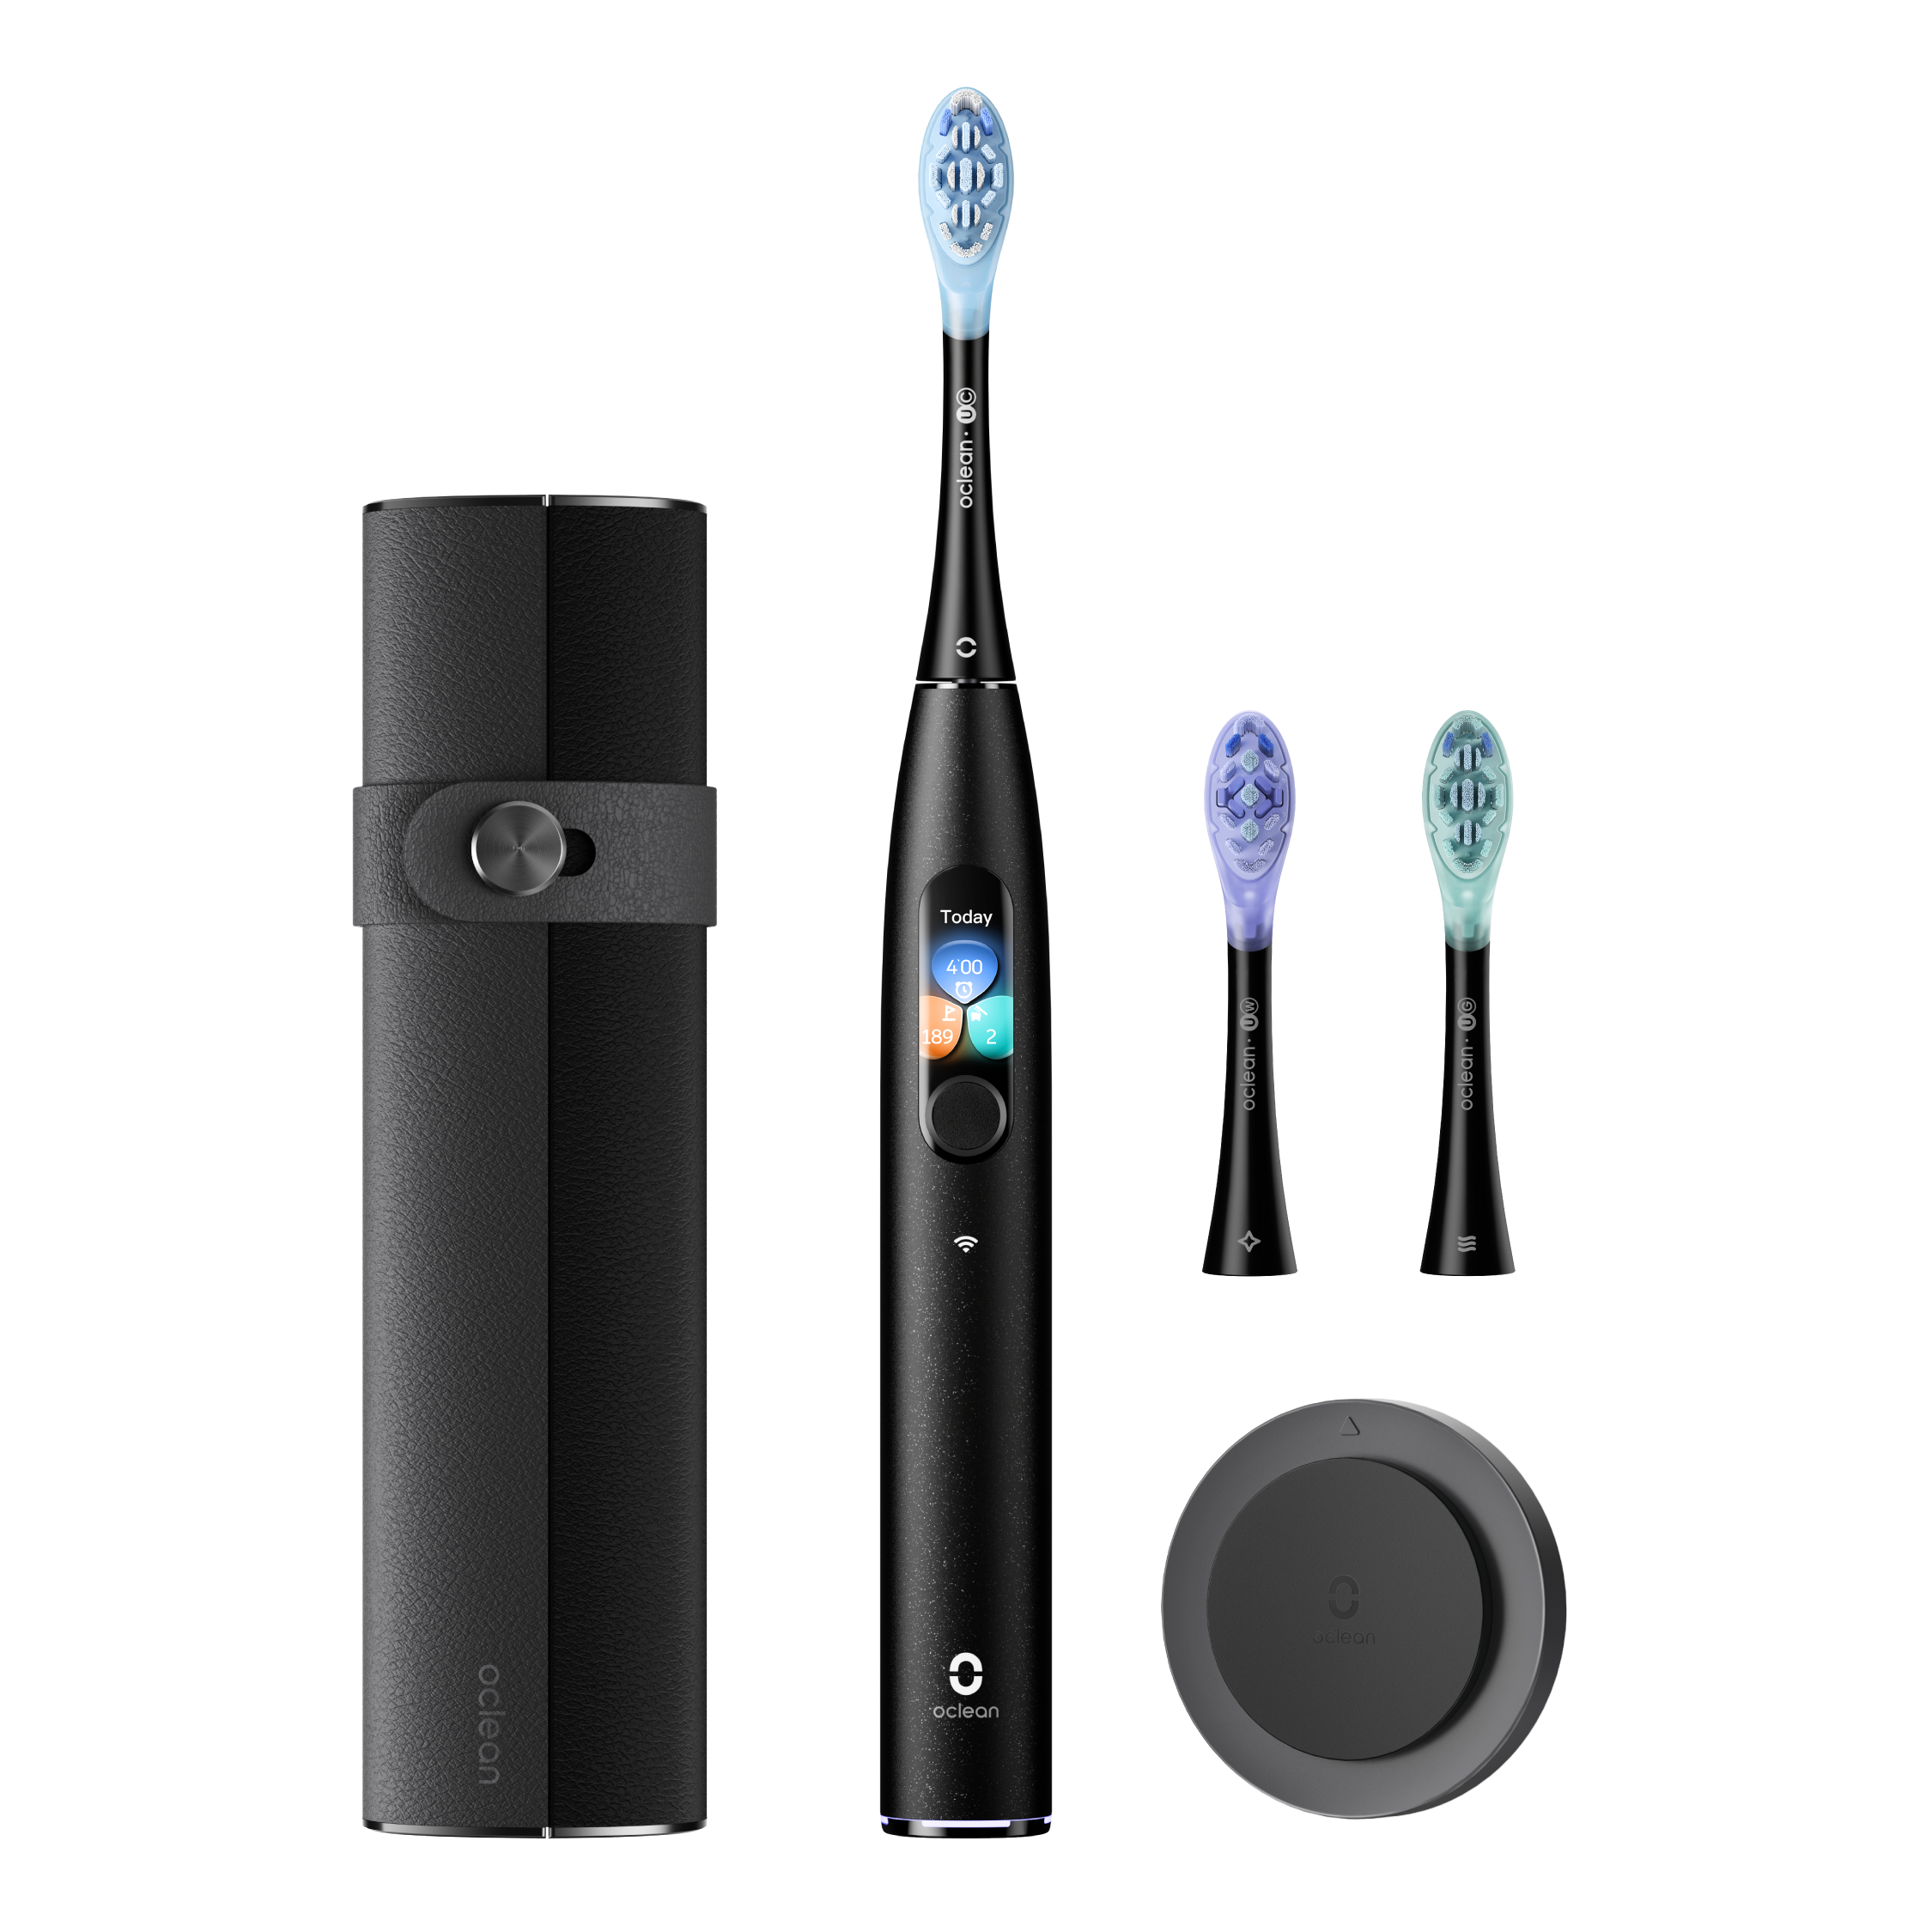 Oclean X Ultra S-Toothbrushes-Oclean Global Store